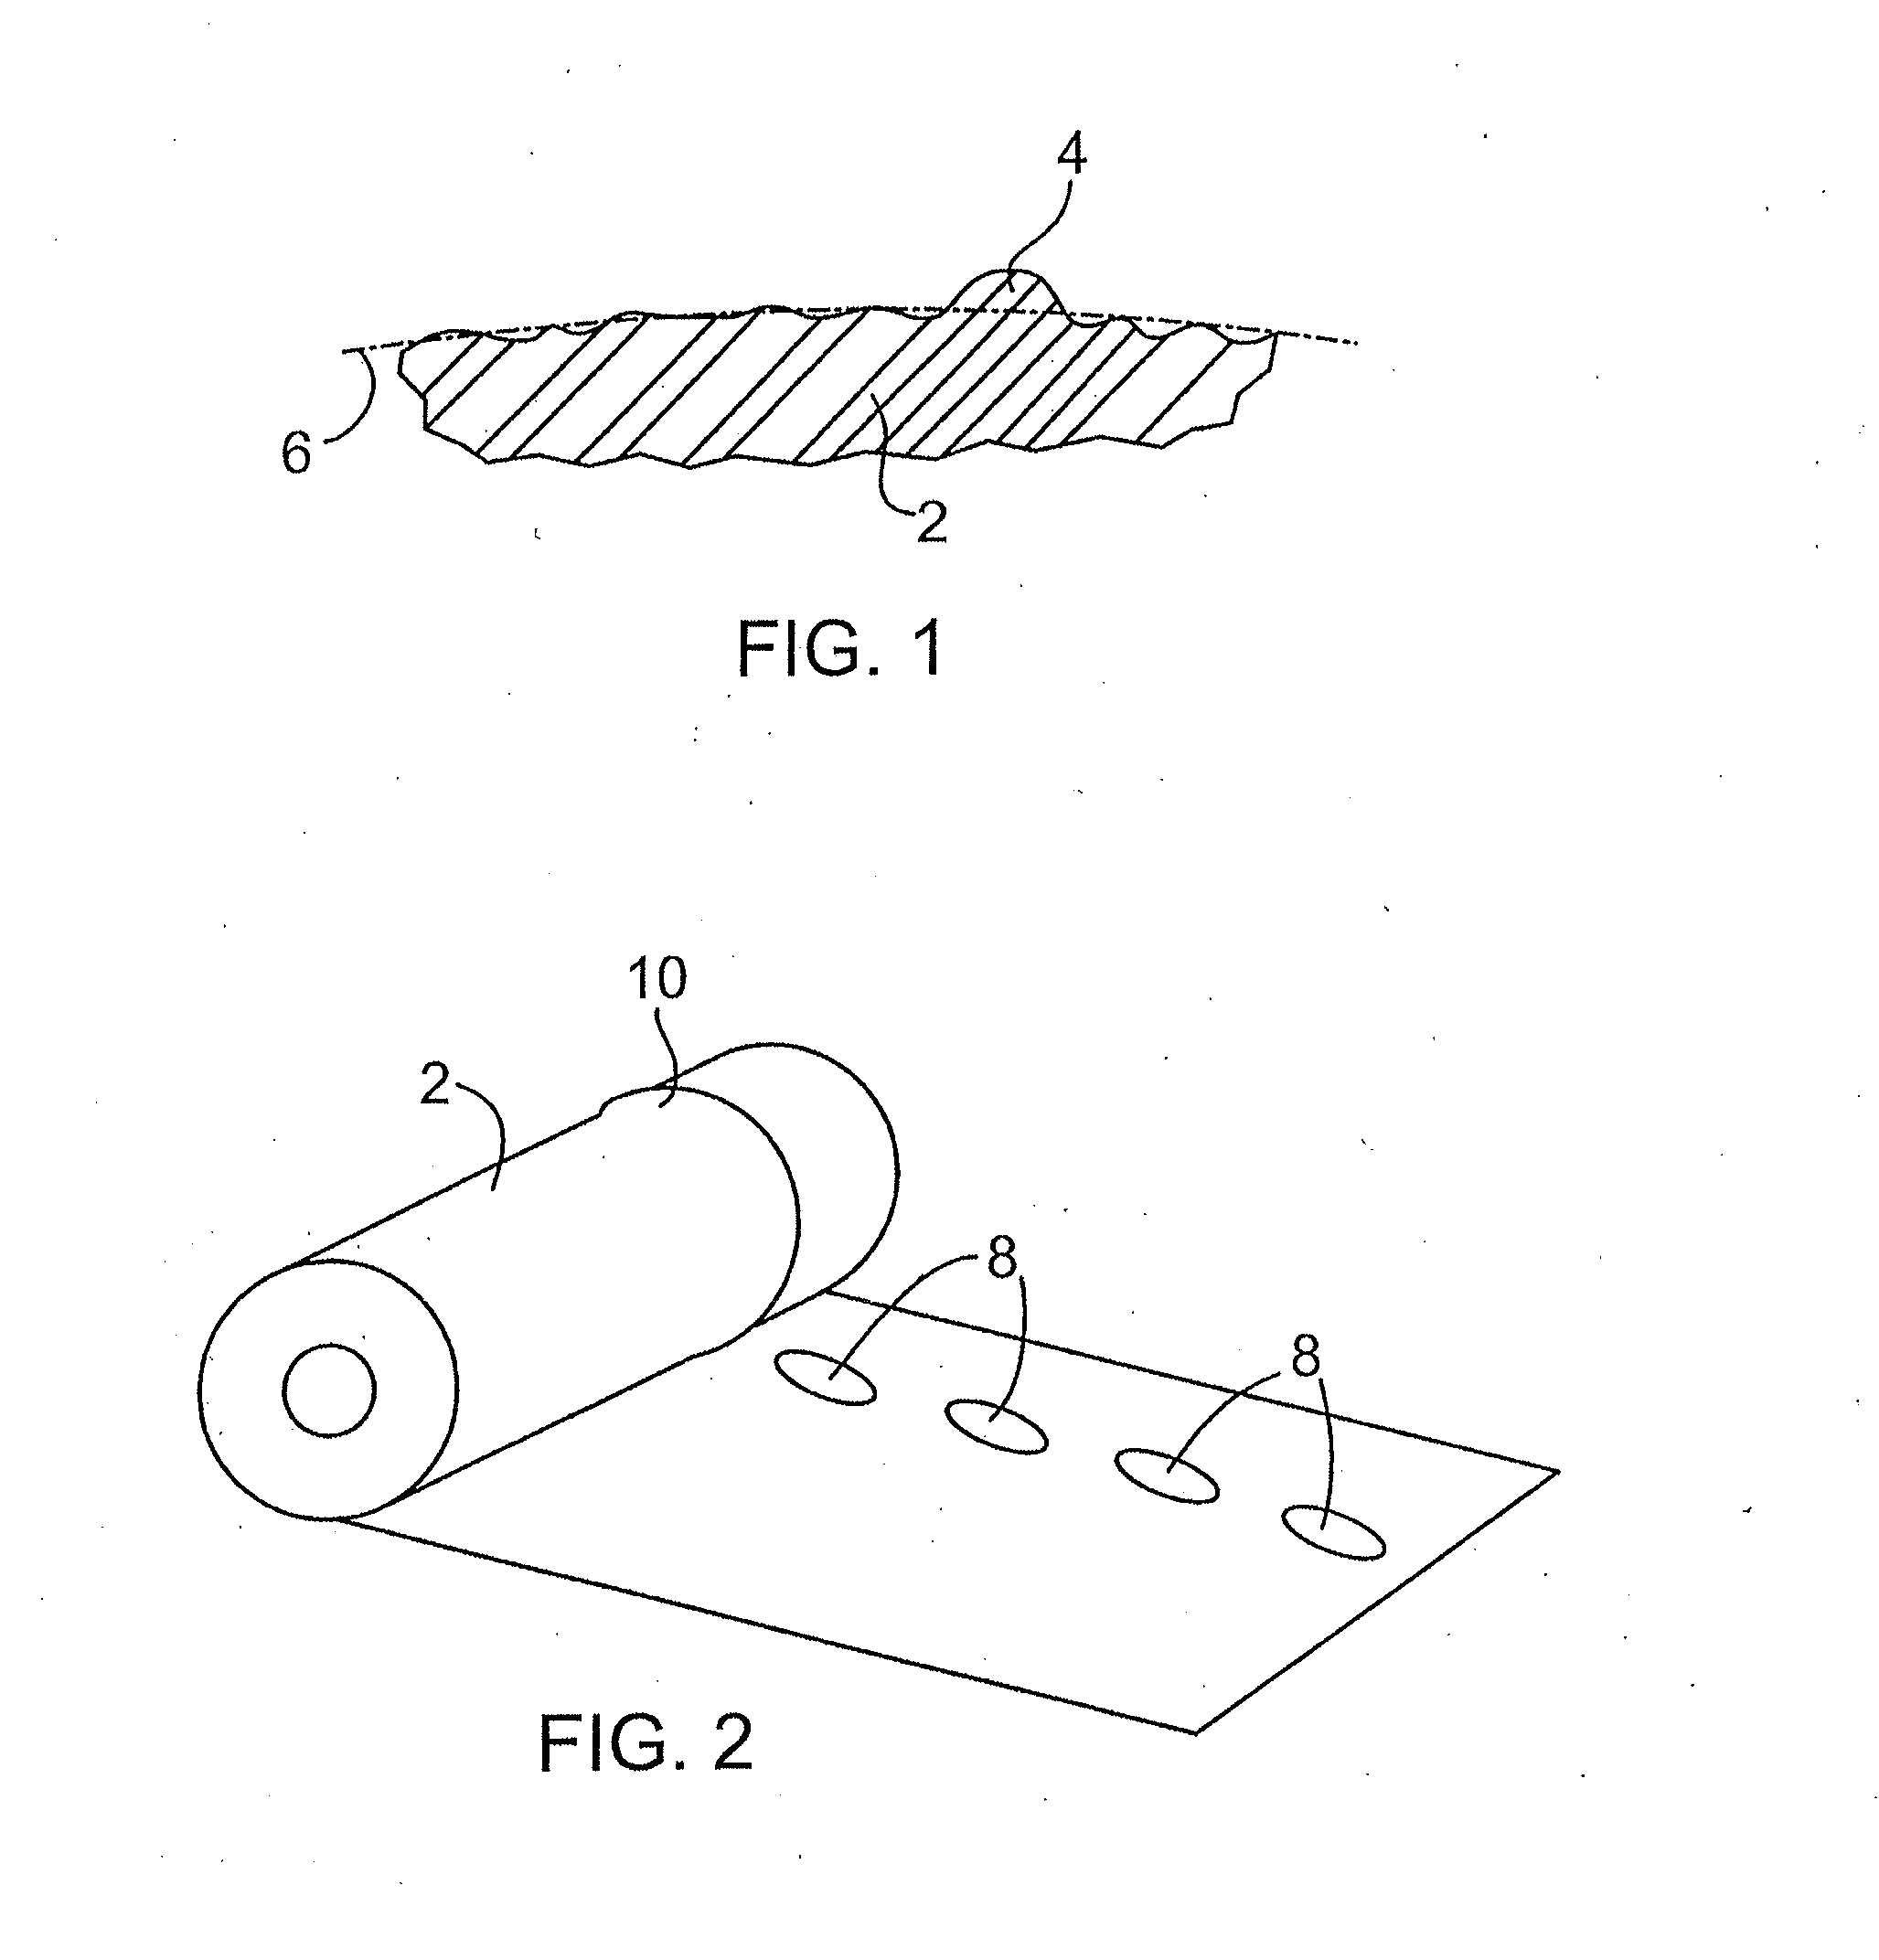 Methods for reducing ridge buckles and annealing stickers in cold rolled strip and ridge-flattening skin pass mill